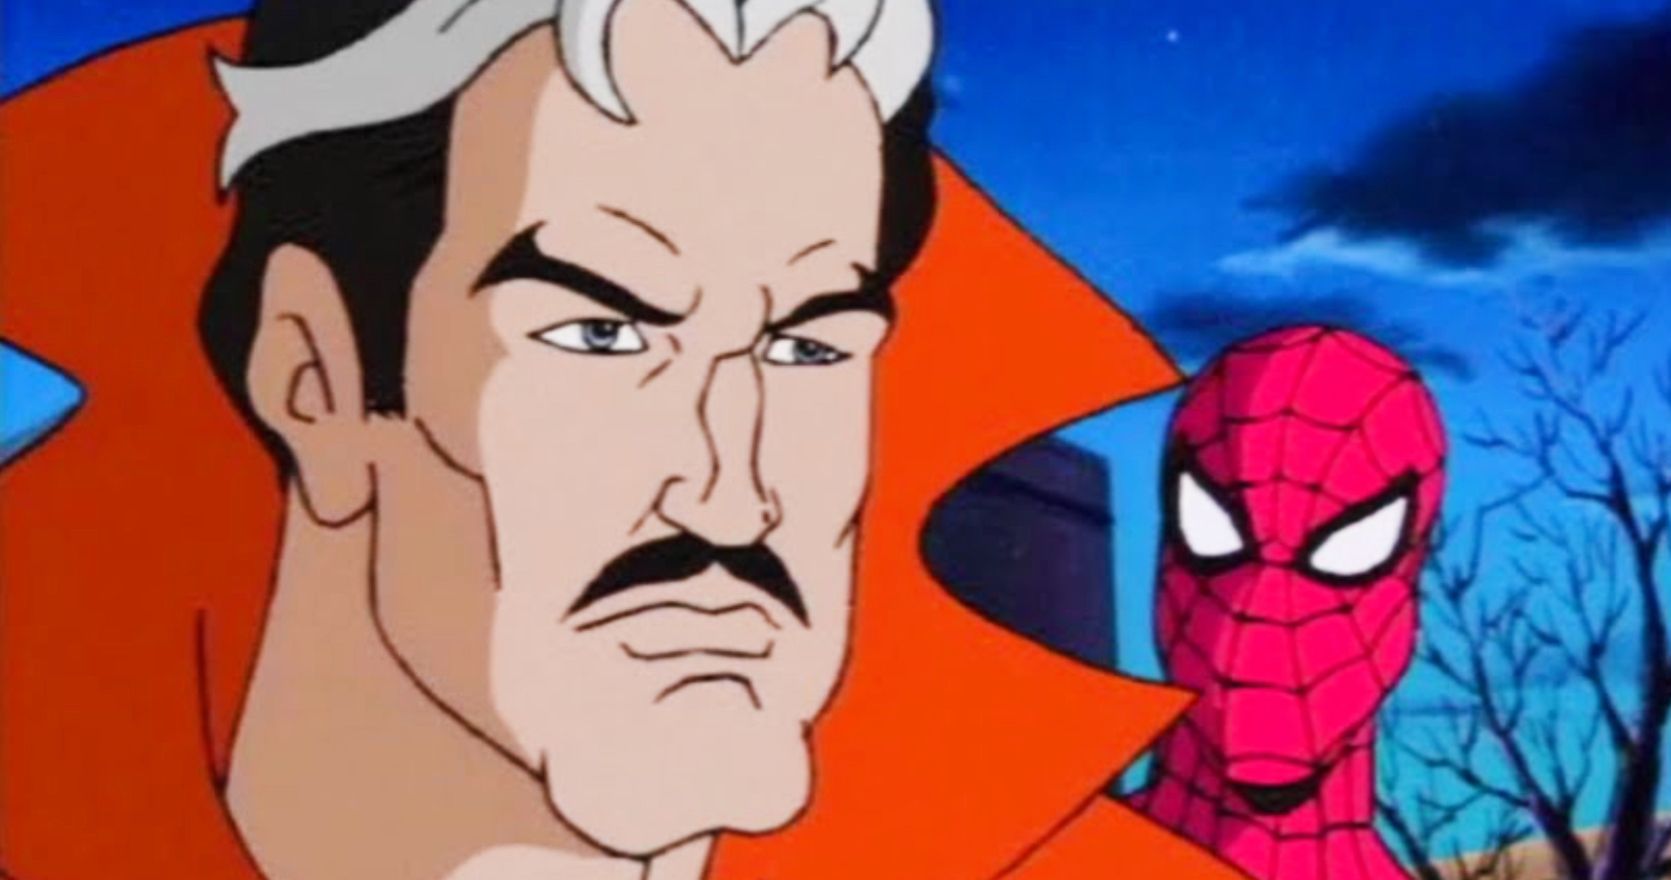 Spider-Man: No Way Home Trailer Gets '90s Animated TV Series Remake